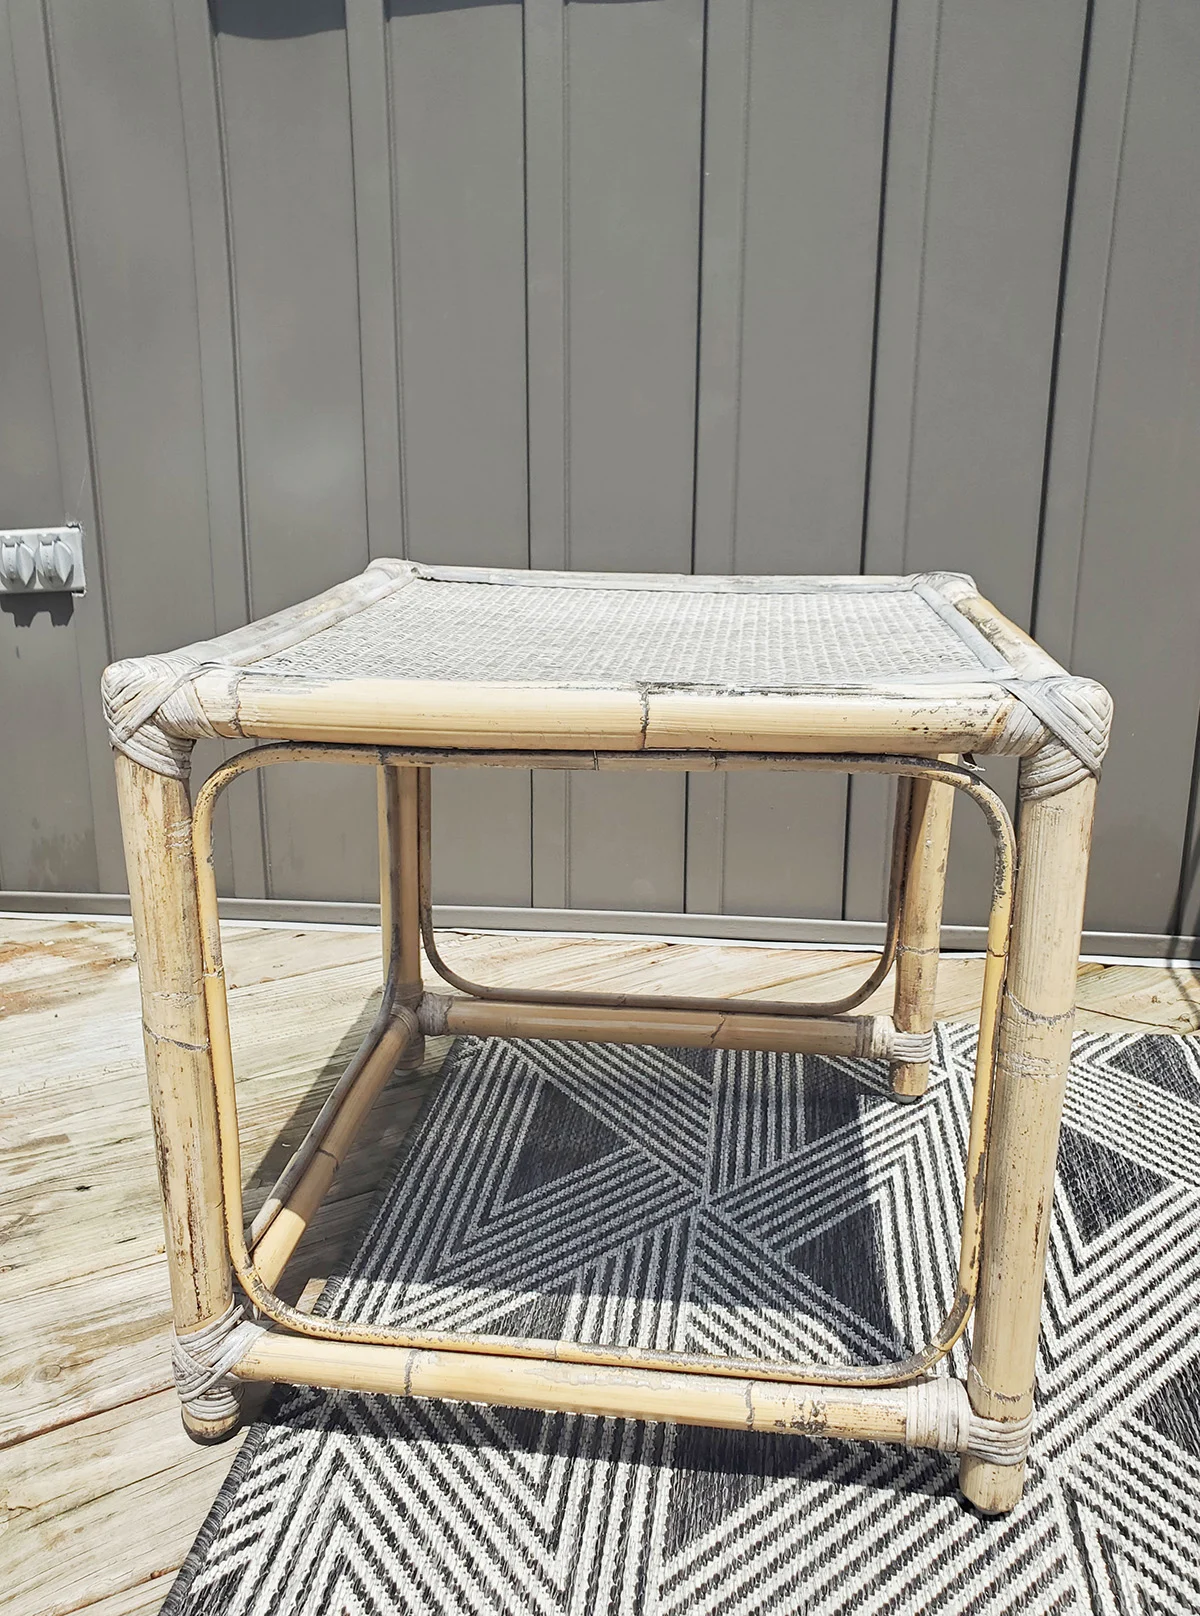 bamboo furniture damaged from rain and sun, how to repair rattan